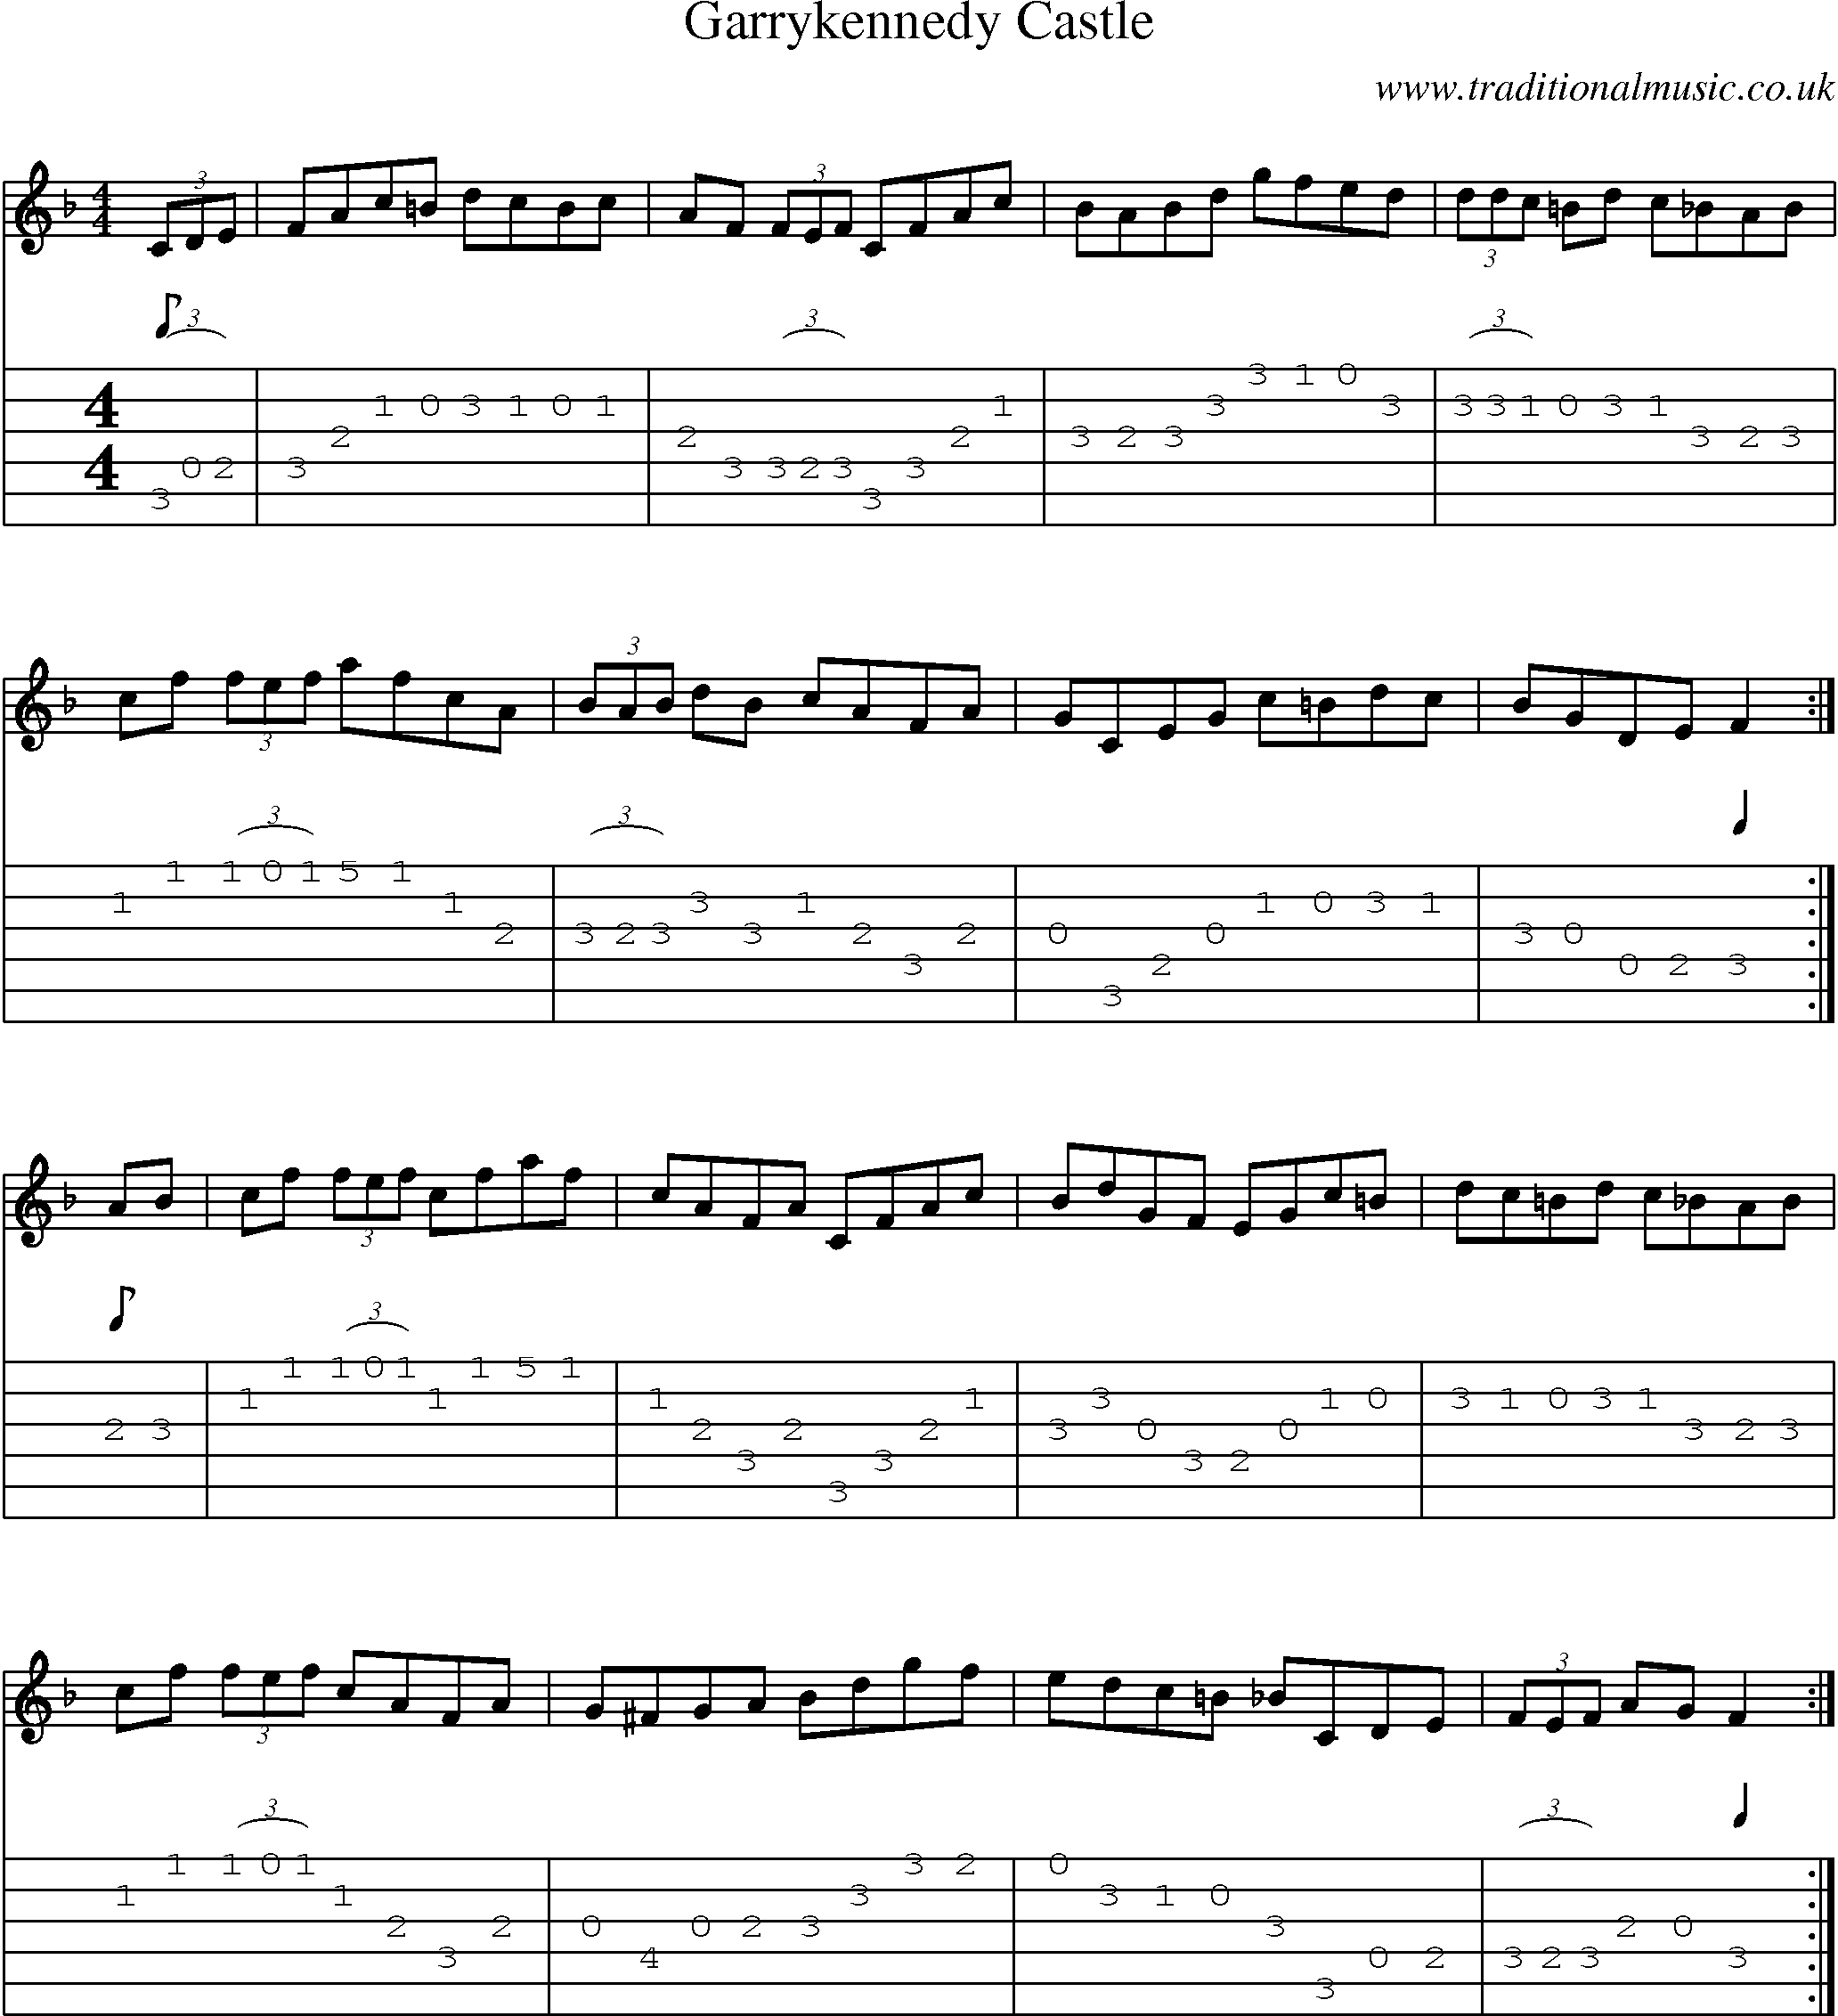 Music Score and Guitar Tabs for Garrykennedy Castle